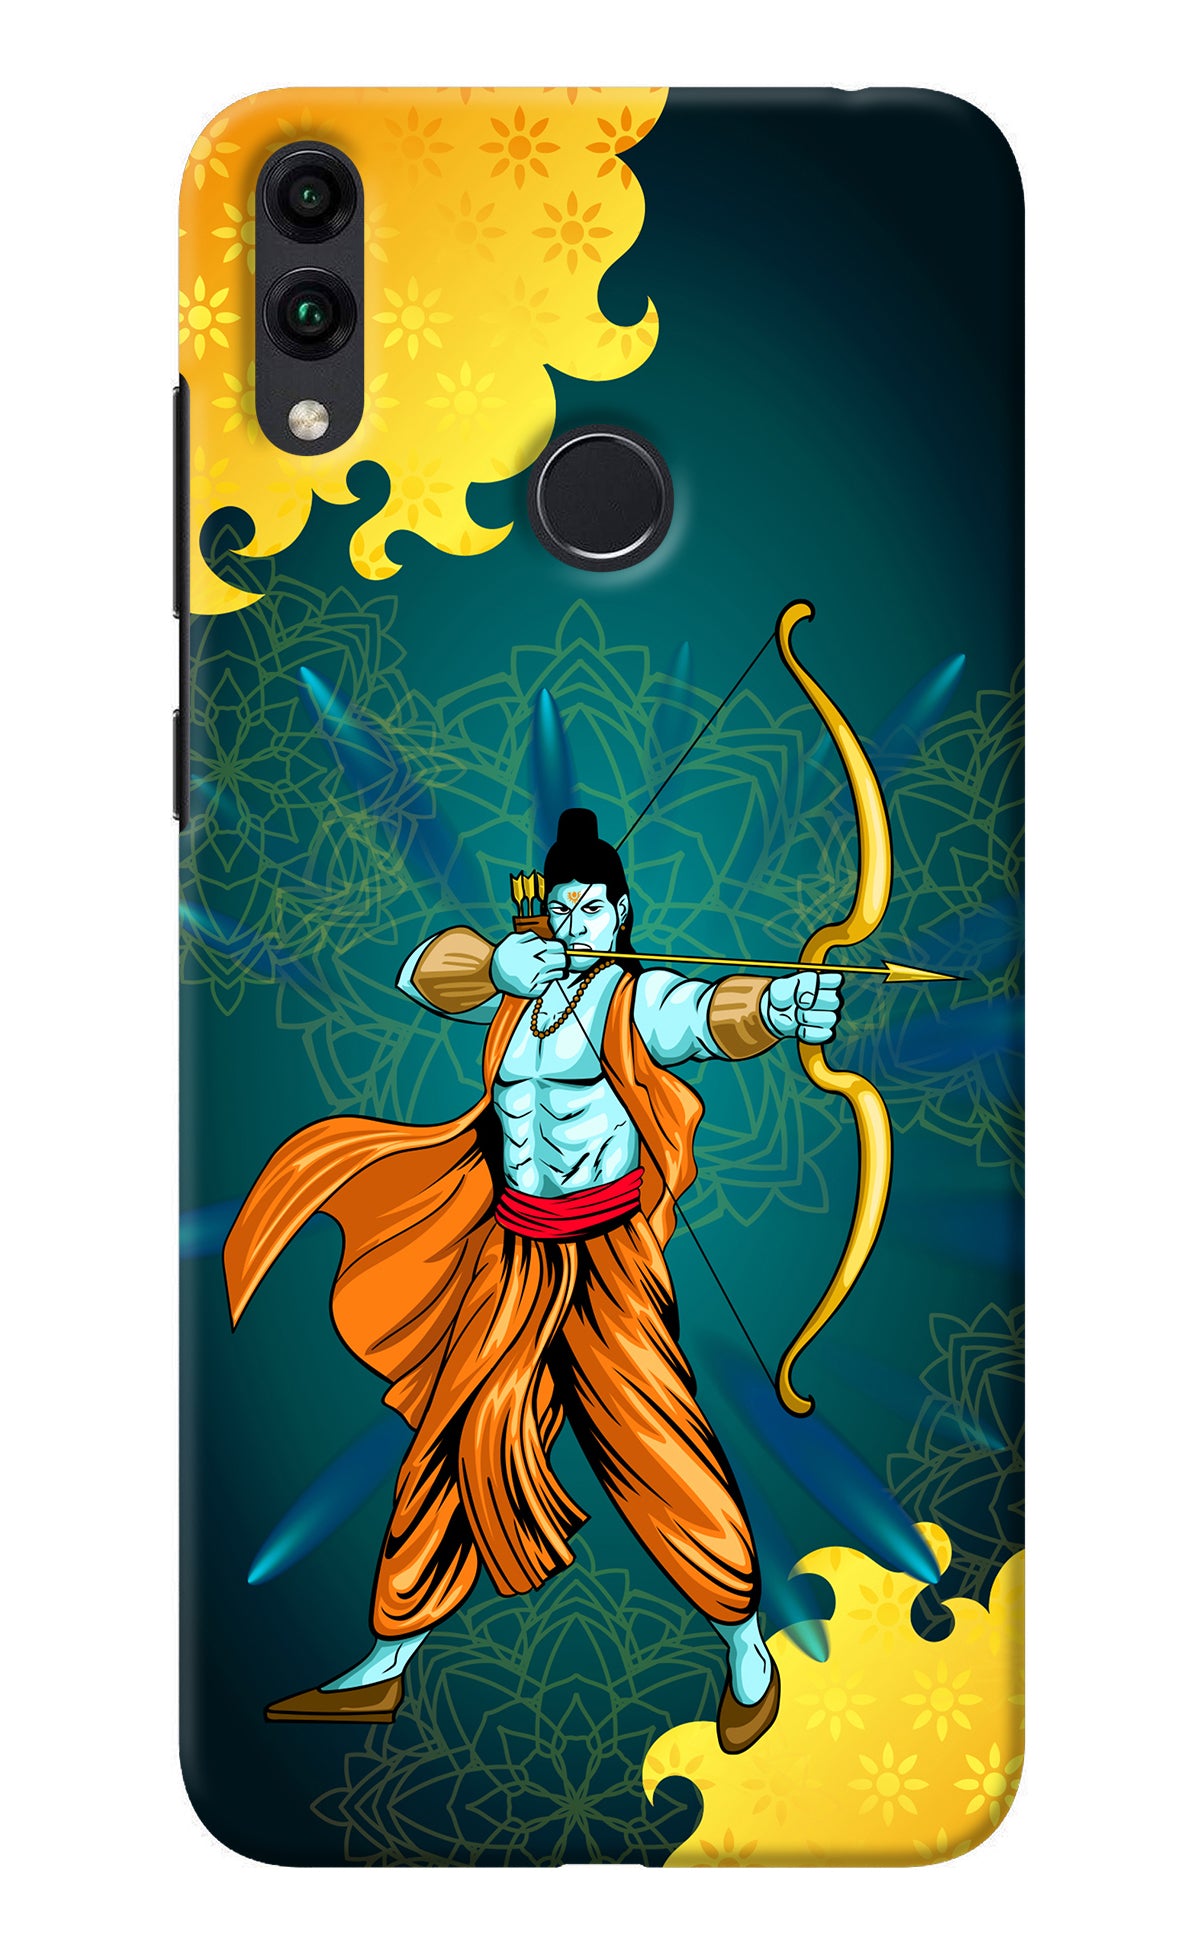 Lord Ram - 6 Honor 8C Back Cover